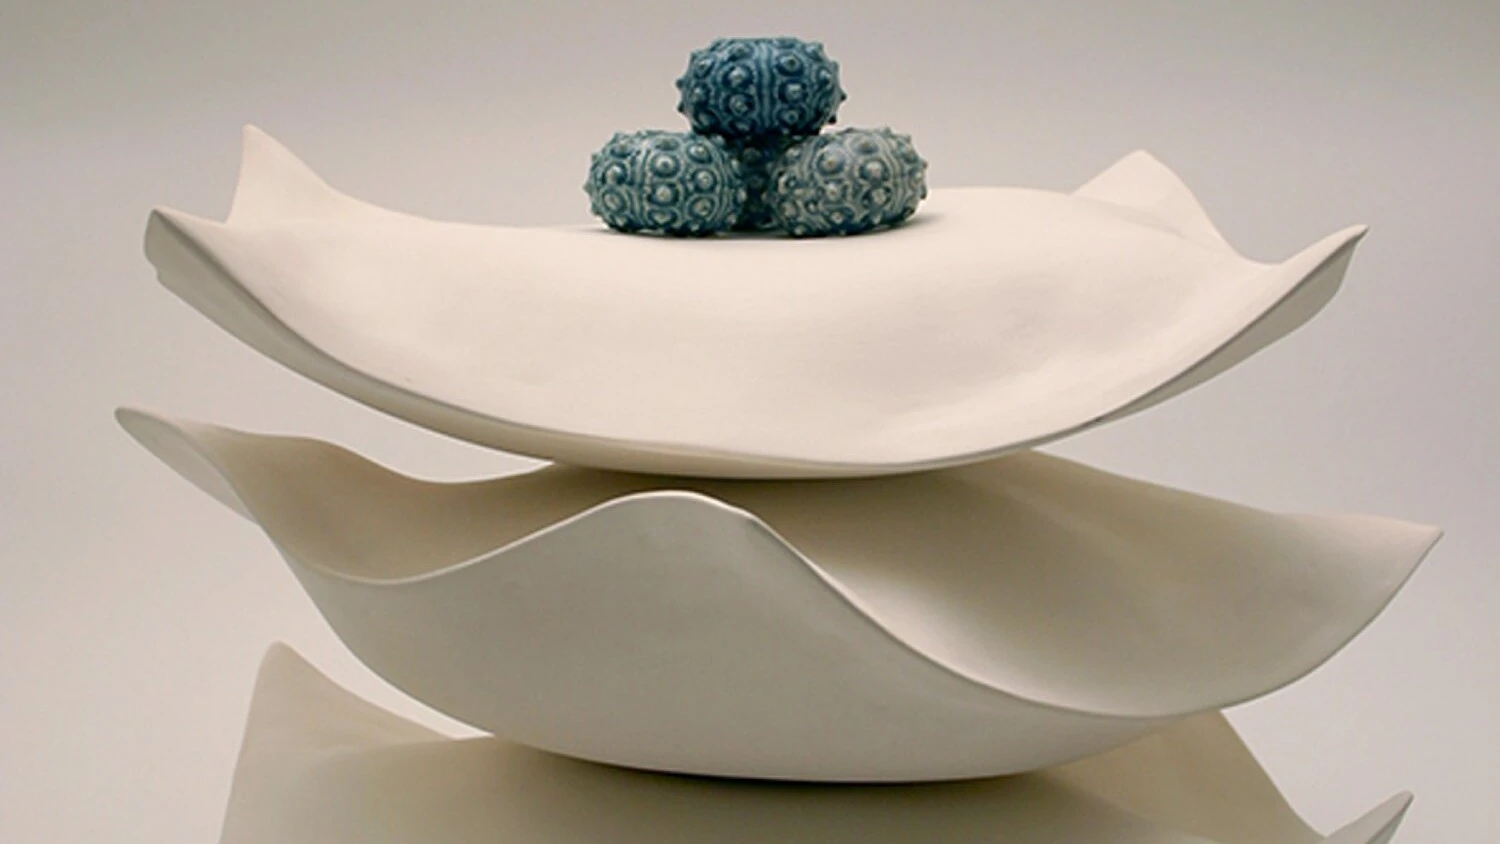 detail of an artwork comprised of three organic shaped ceramic objects stacked on top of each other with four ceramic sea urchins in a group on top